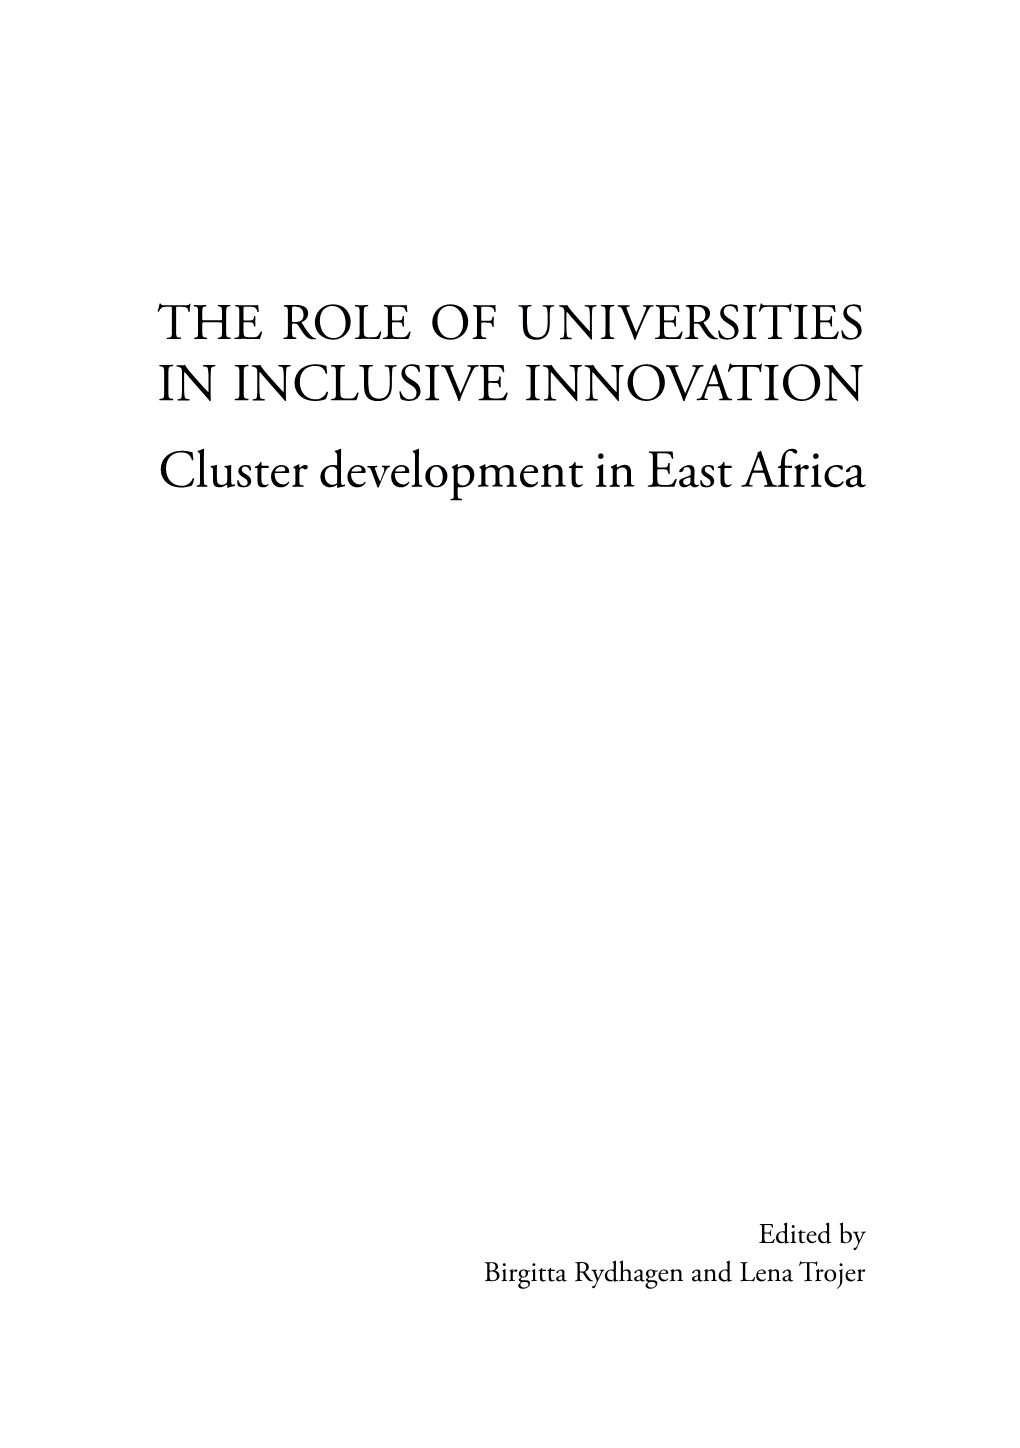 IN INCLUSIVE INNOVATION Cluster Development in East Africa